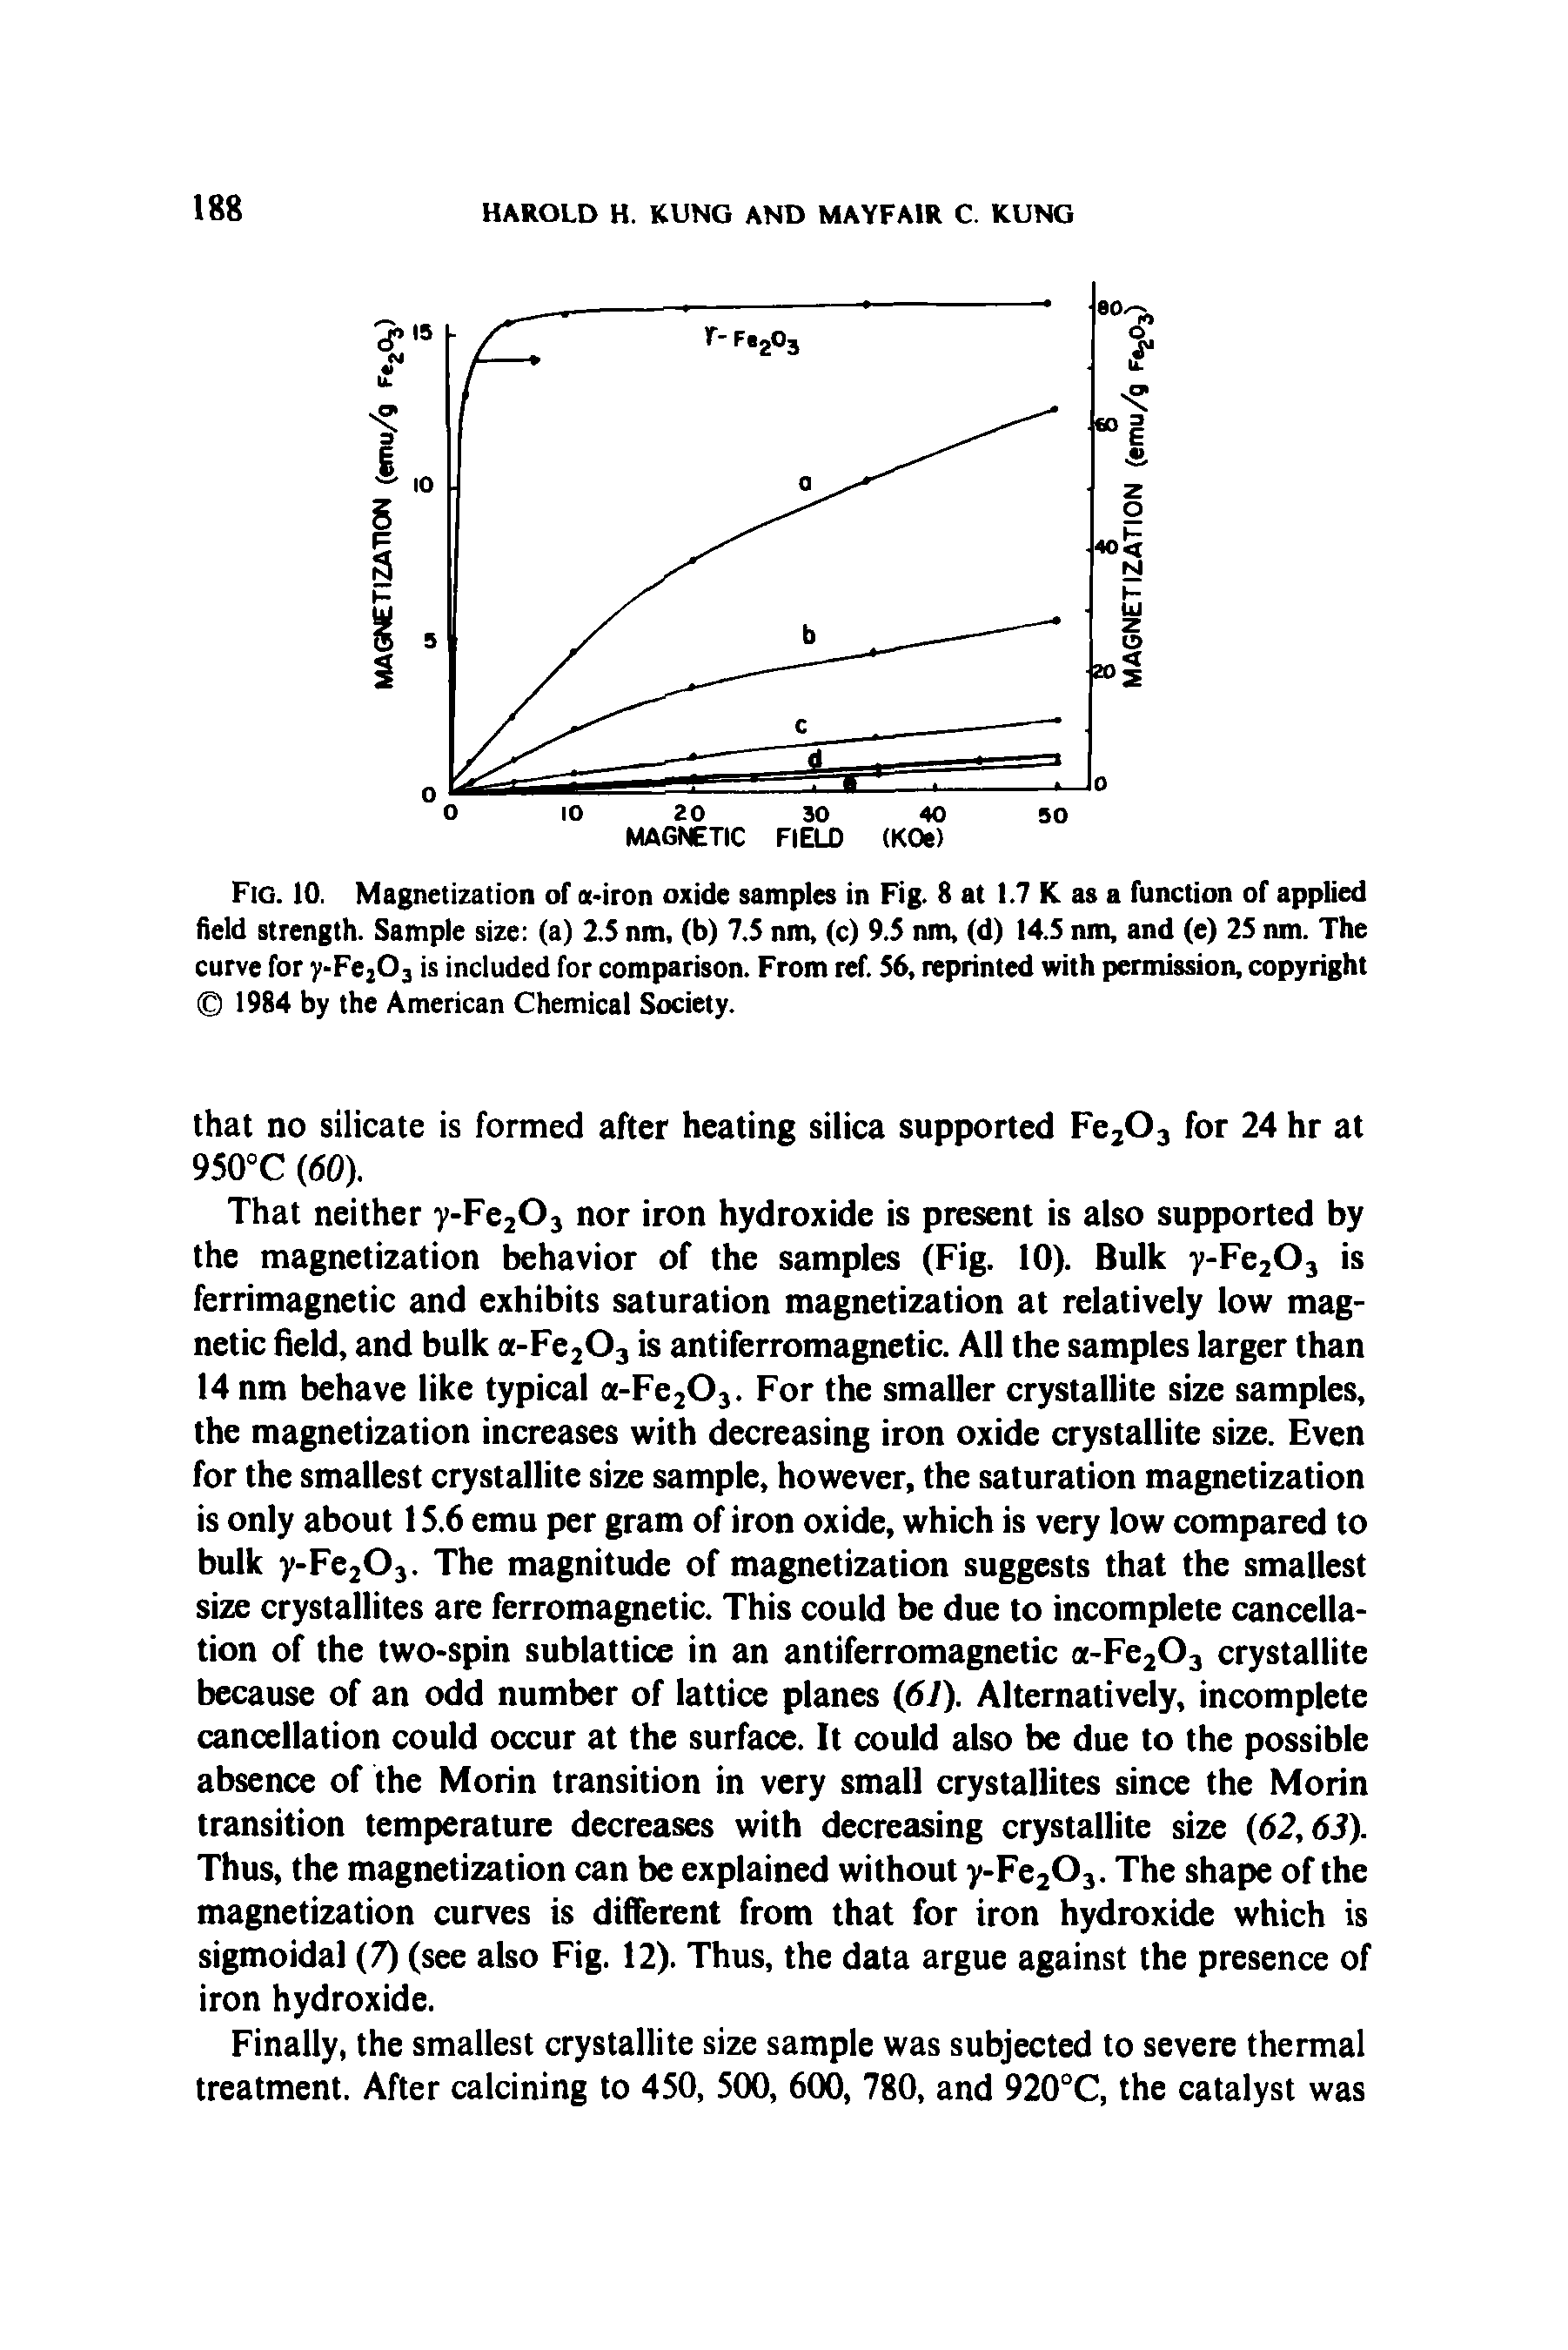 Fig. 10. Magnetization of a-iron oxide samples in Fig. 8 at 1.7 K. as a function of applied field strength. Sample size (a) 2.5 nm, (b) 7.5 nm, (c) 9.5 nm, (d) 14.5 nm, and (e) 25 nm. The curve for y-Fe203 is included for comparison. From ref. 56, reprinted with permission, copyright 1984 by the American Chemical Society.